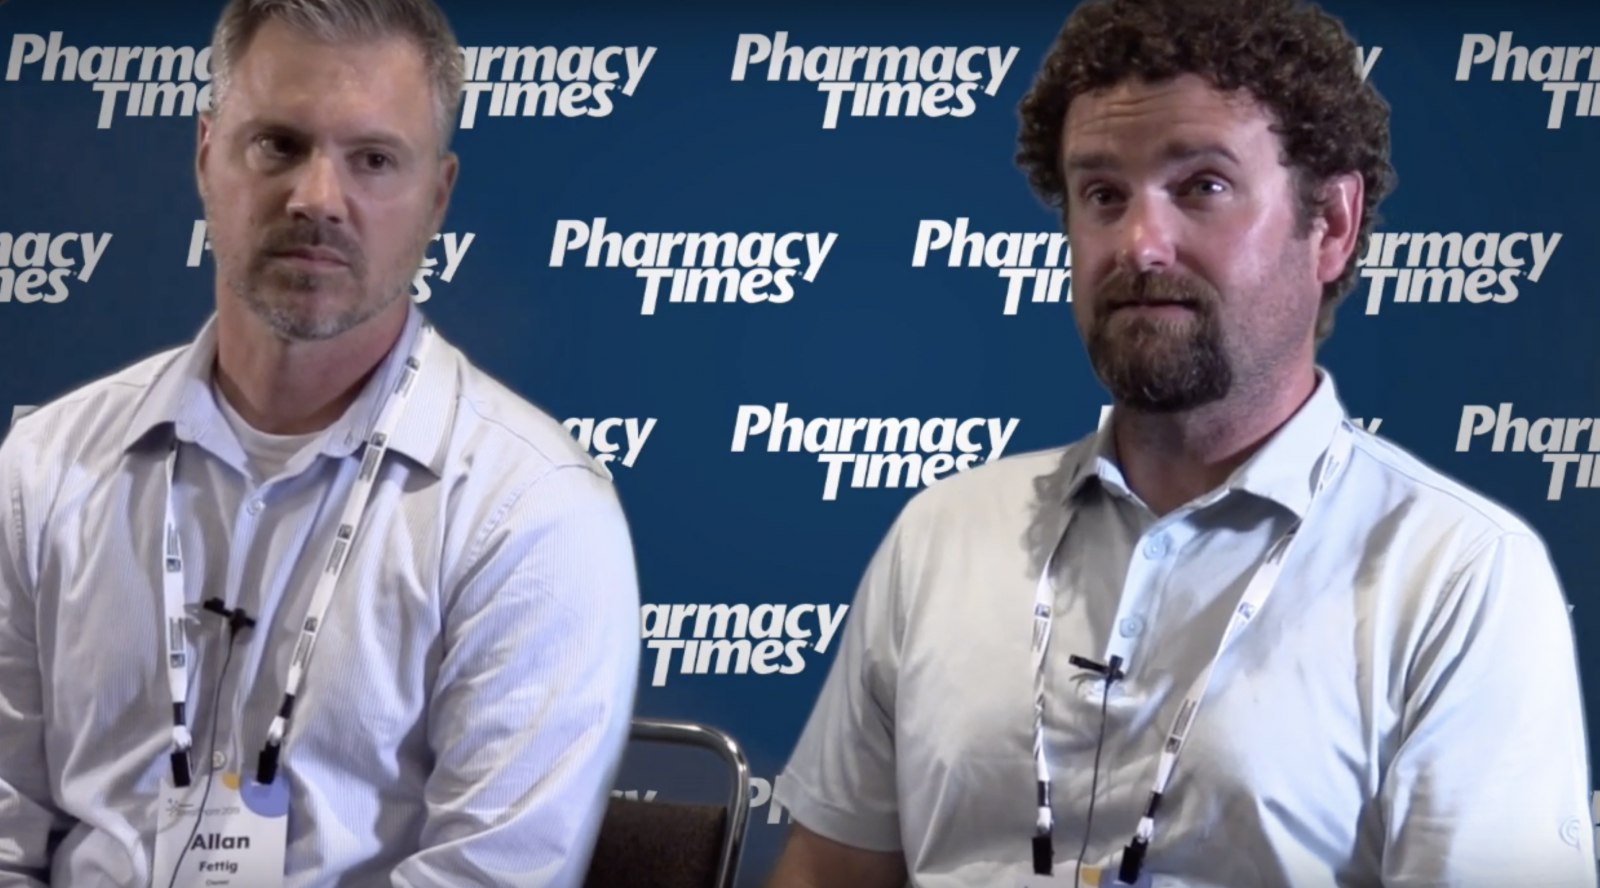 Co-Owners of Trumm Drug Discuss Their Approach to the Change in Ownership